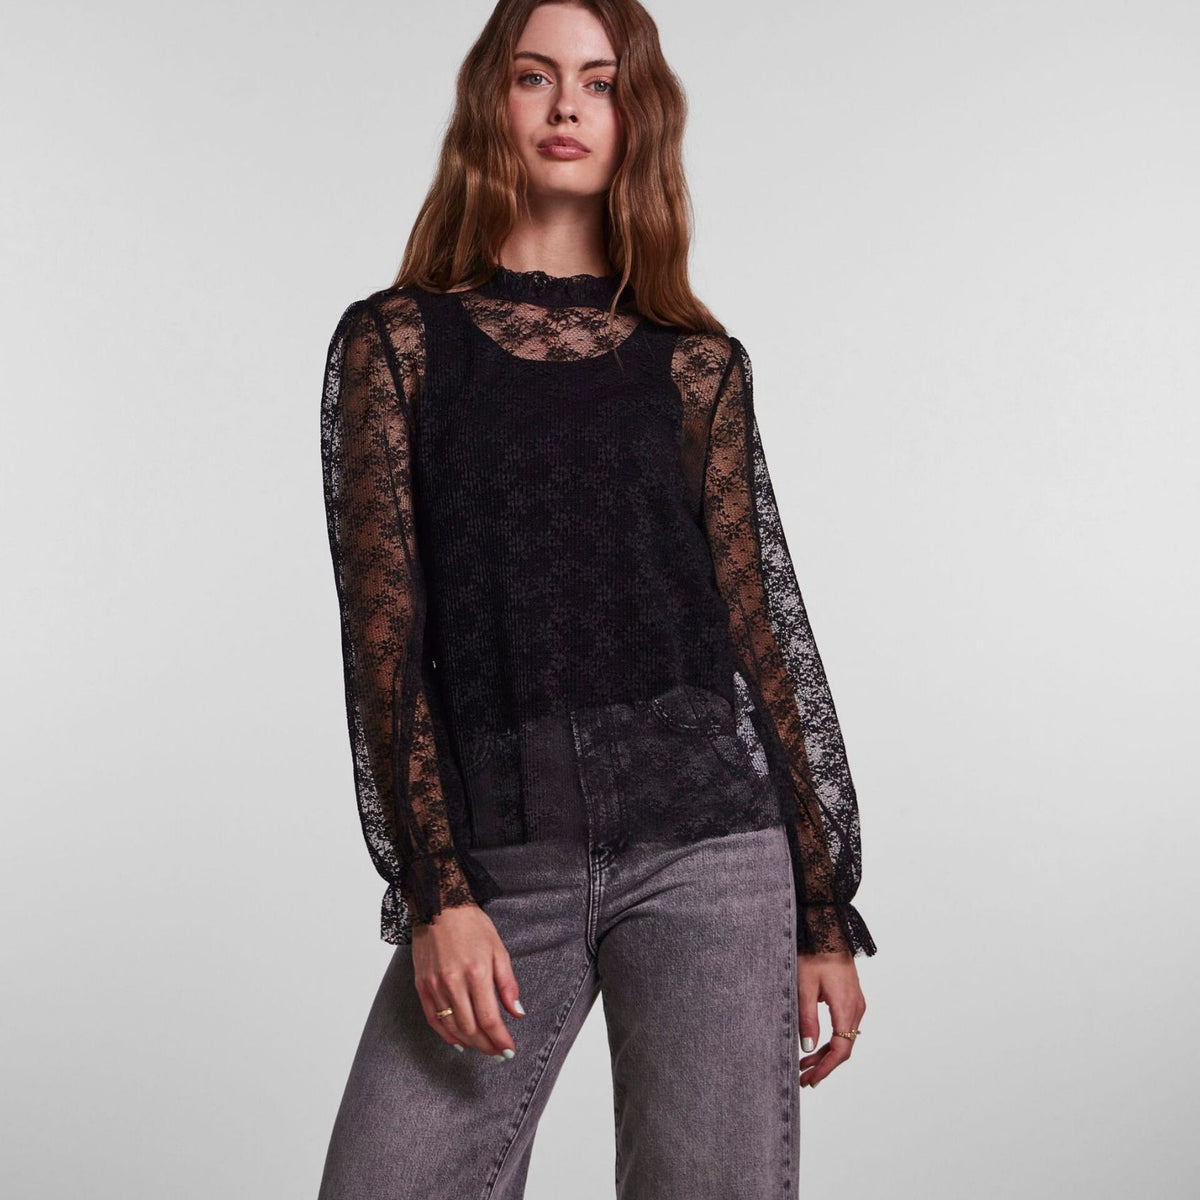 Pieces - (Black) Lace Top LS May